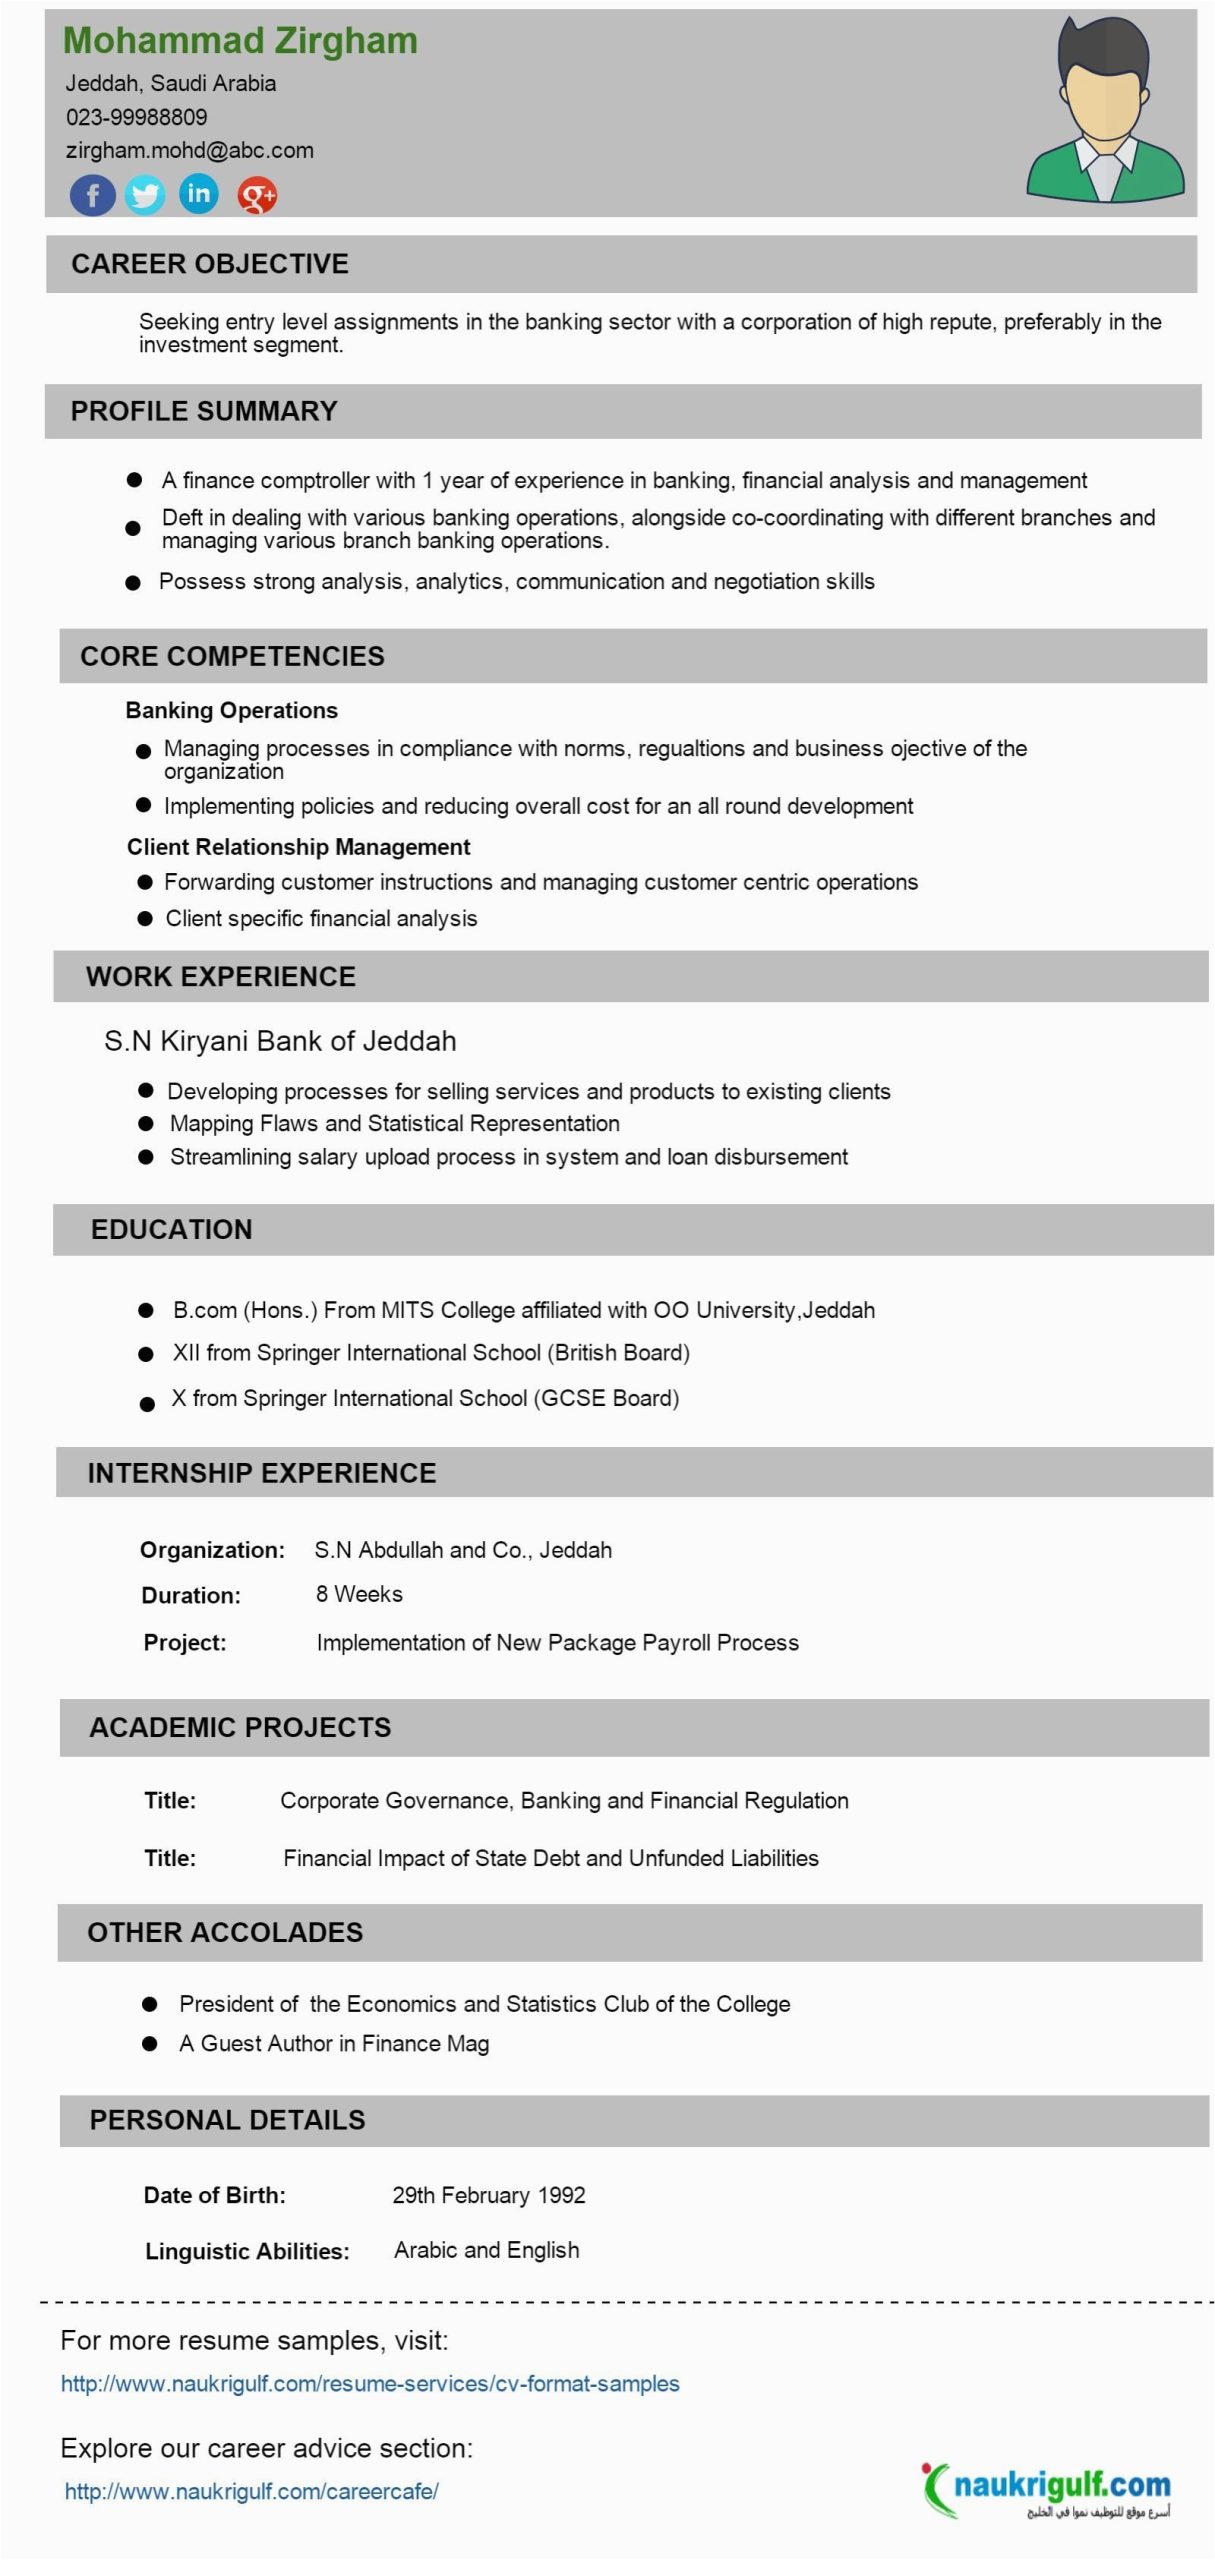 Sample Resume for Probationary Officers In Bank Resume format for Freshers for Bank Job Free Investment Banking